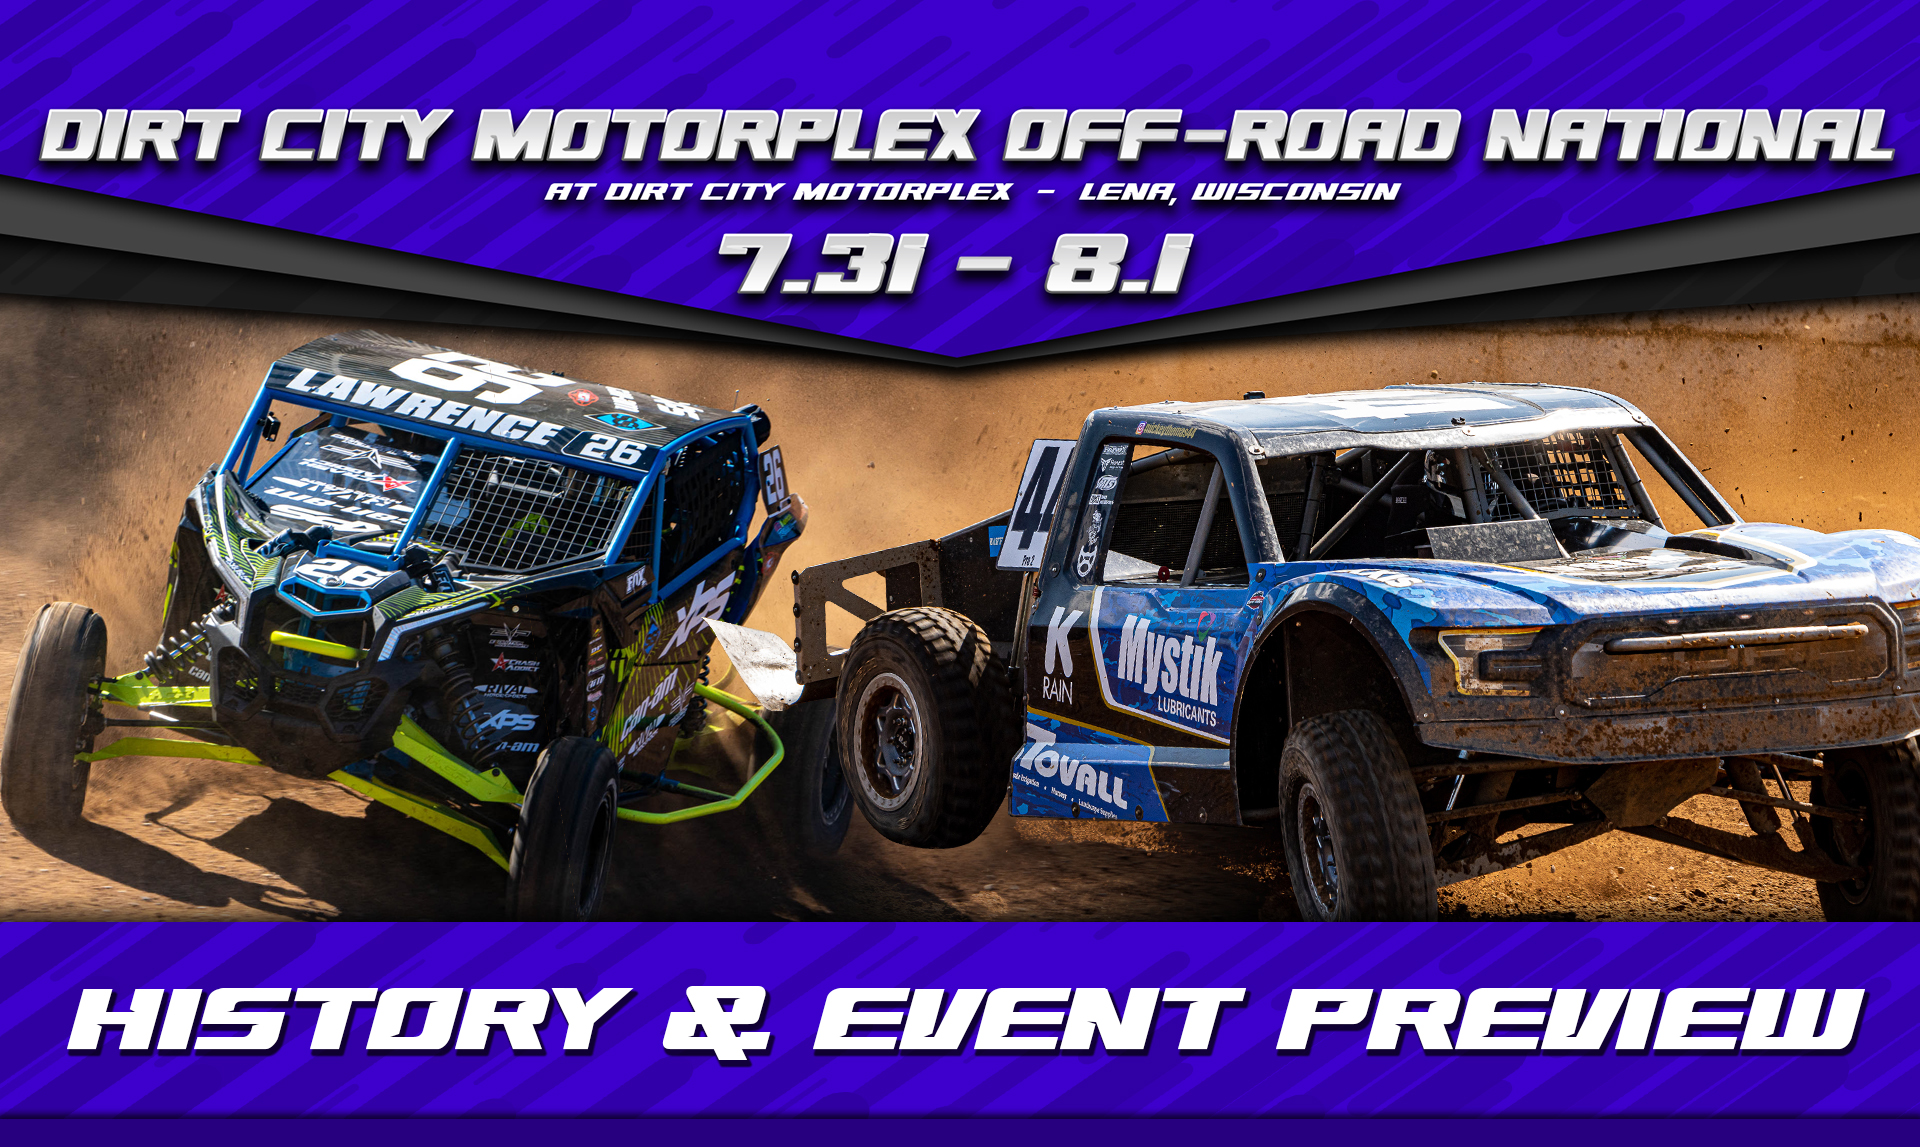 Dirt City OffRoad National Event History & Preview AMSOIL